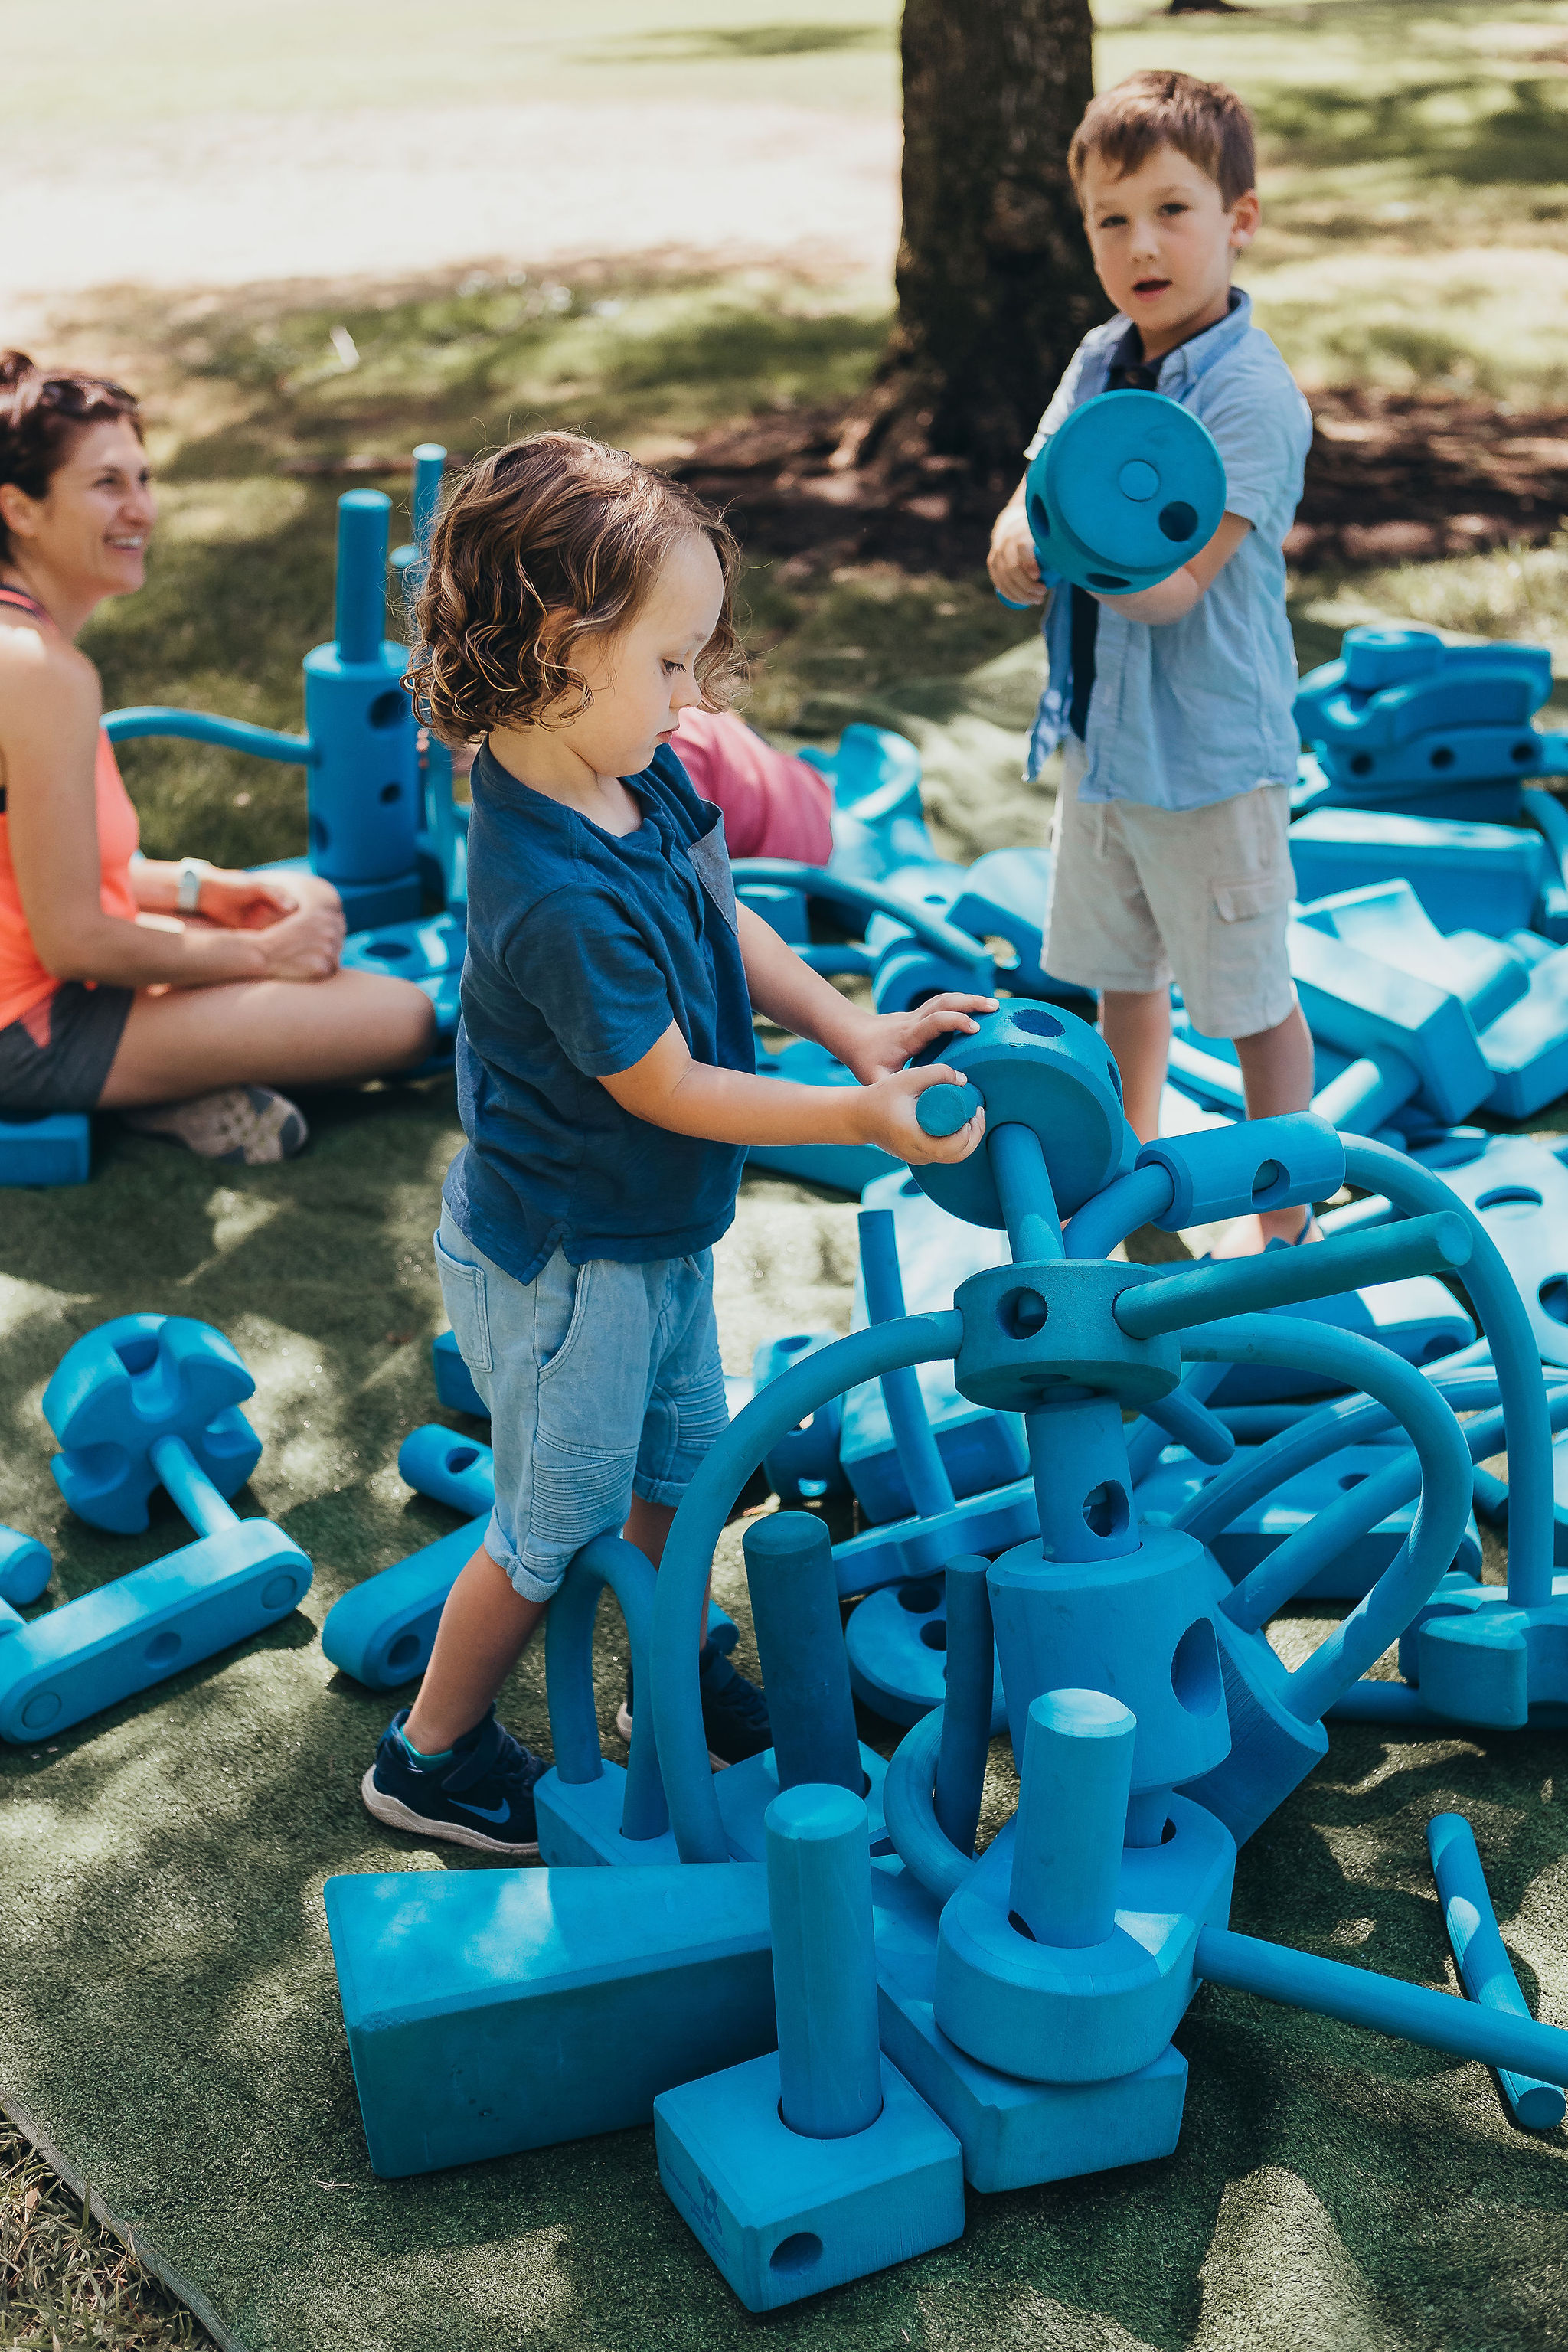 Children playing with blue building blocks 